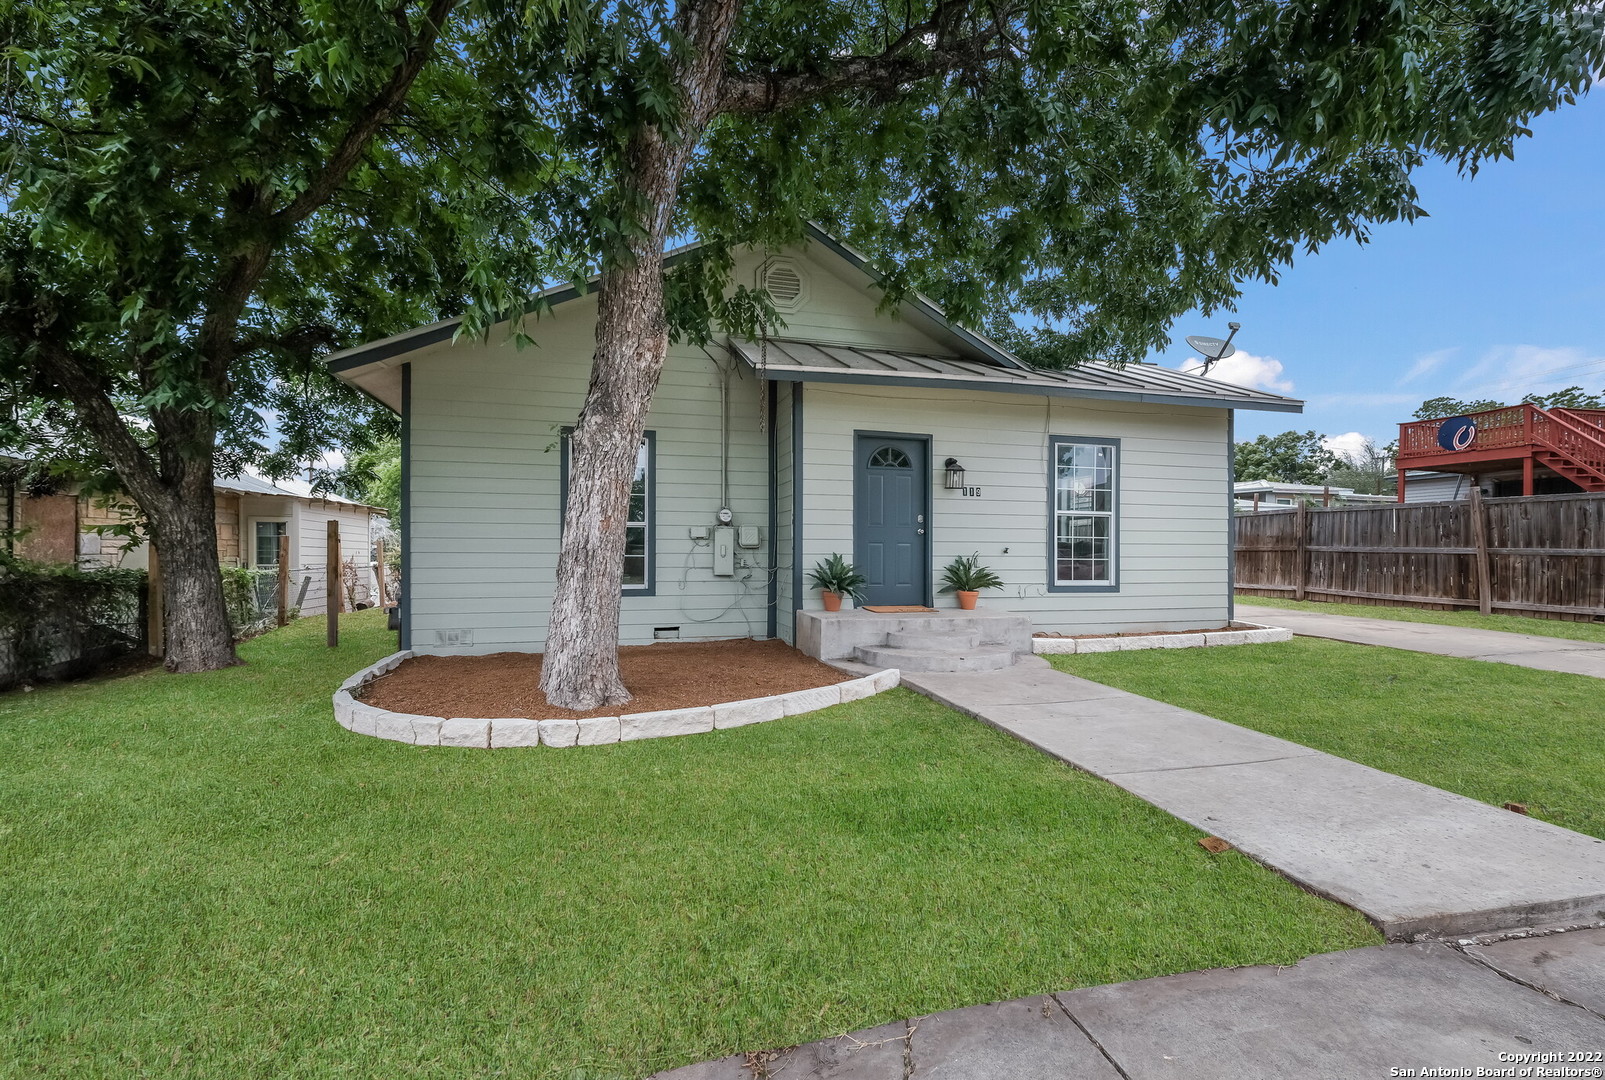 Looking to get the full downtown experience in a home that feels like new? Check out our new listing in the Historic Gardens neighborhood, walking distance to the Alamodome, Dakota, Estate Coffee, and Cherrity Bar! From the inside out, this home looks and feels like it was built in the modern age but still has the historic home charm. Updated foundation, roof, HVAC, appliances, countertops, and bathrooms make this home a great deal for anyone looking for a low-maintenance investment or primary residence. The high ceilings, open layout, big bedrooms, and extra storage in the back are great features. The xeriscaped yard means no extra hassle, so you can just enjoy the San Antonio experience. With new construction in the area starting over $400k, this is a great entry to the market. Come take a look!